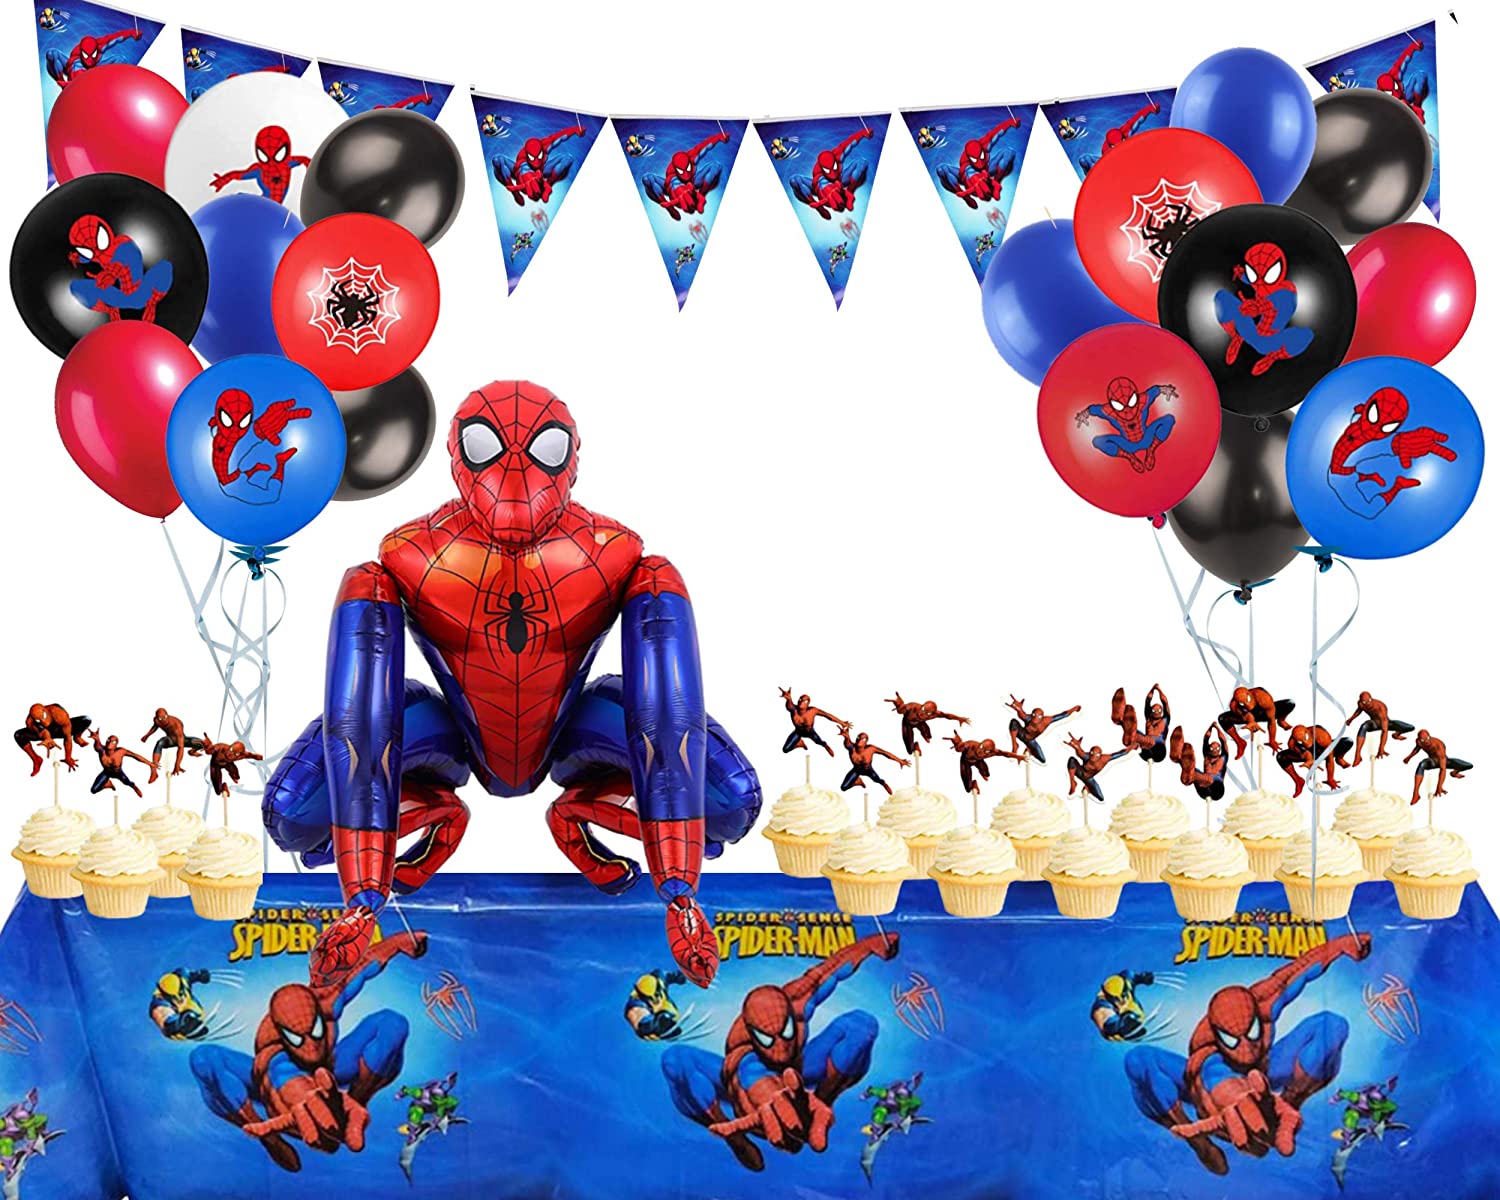 Spiderman cake topper - best spider man cake and cupcake ideas to liven up parties and events. Save the image in pdf to print whenever you want.